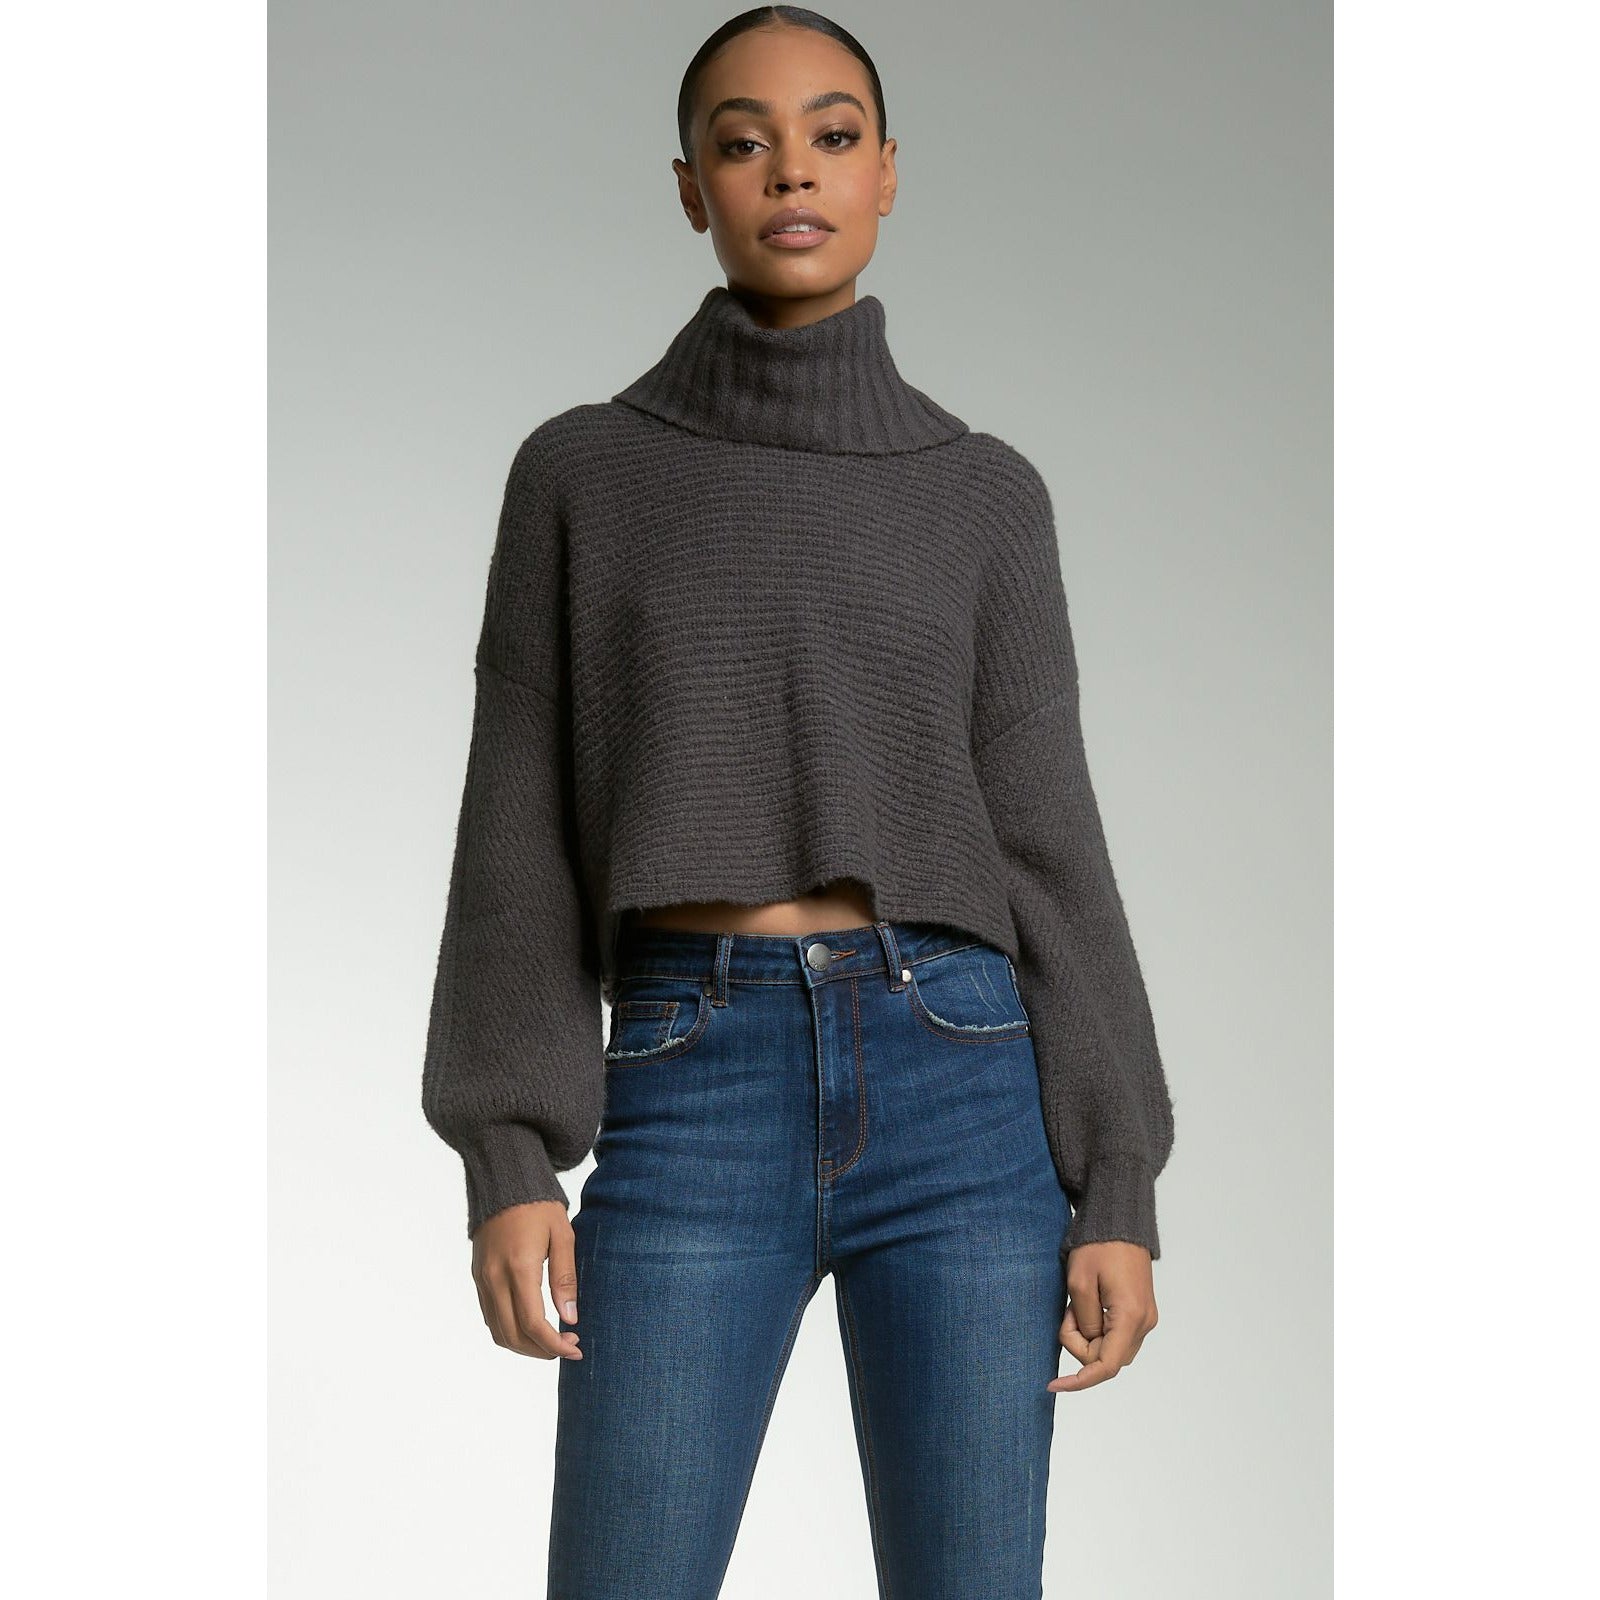 Criss Cross Cropped Sweater